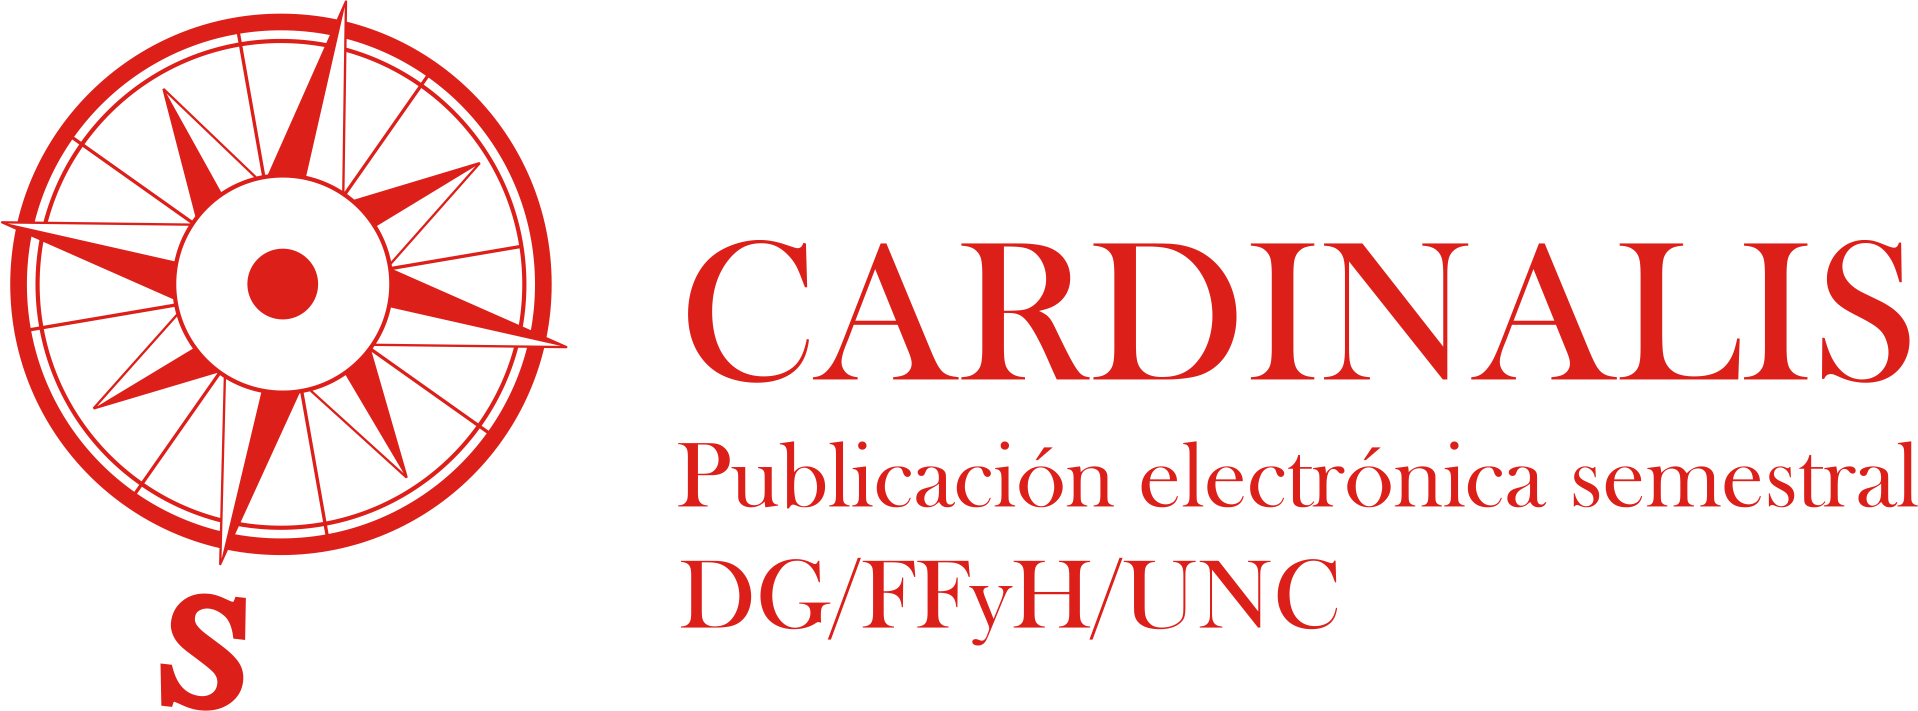 Cardinalis Scientific Magazine. Department of Geography, Faculty of Philosophy and Humanities. National University of Cordoba